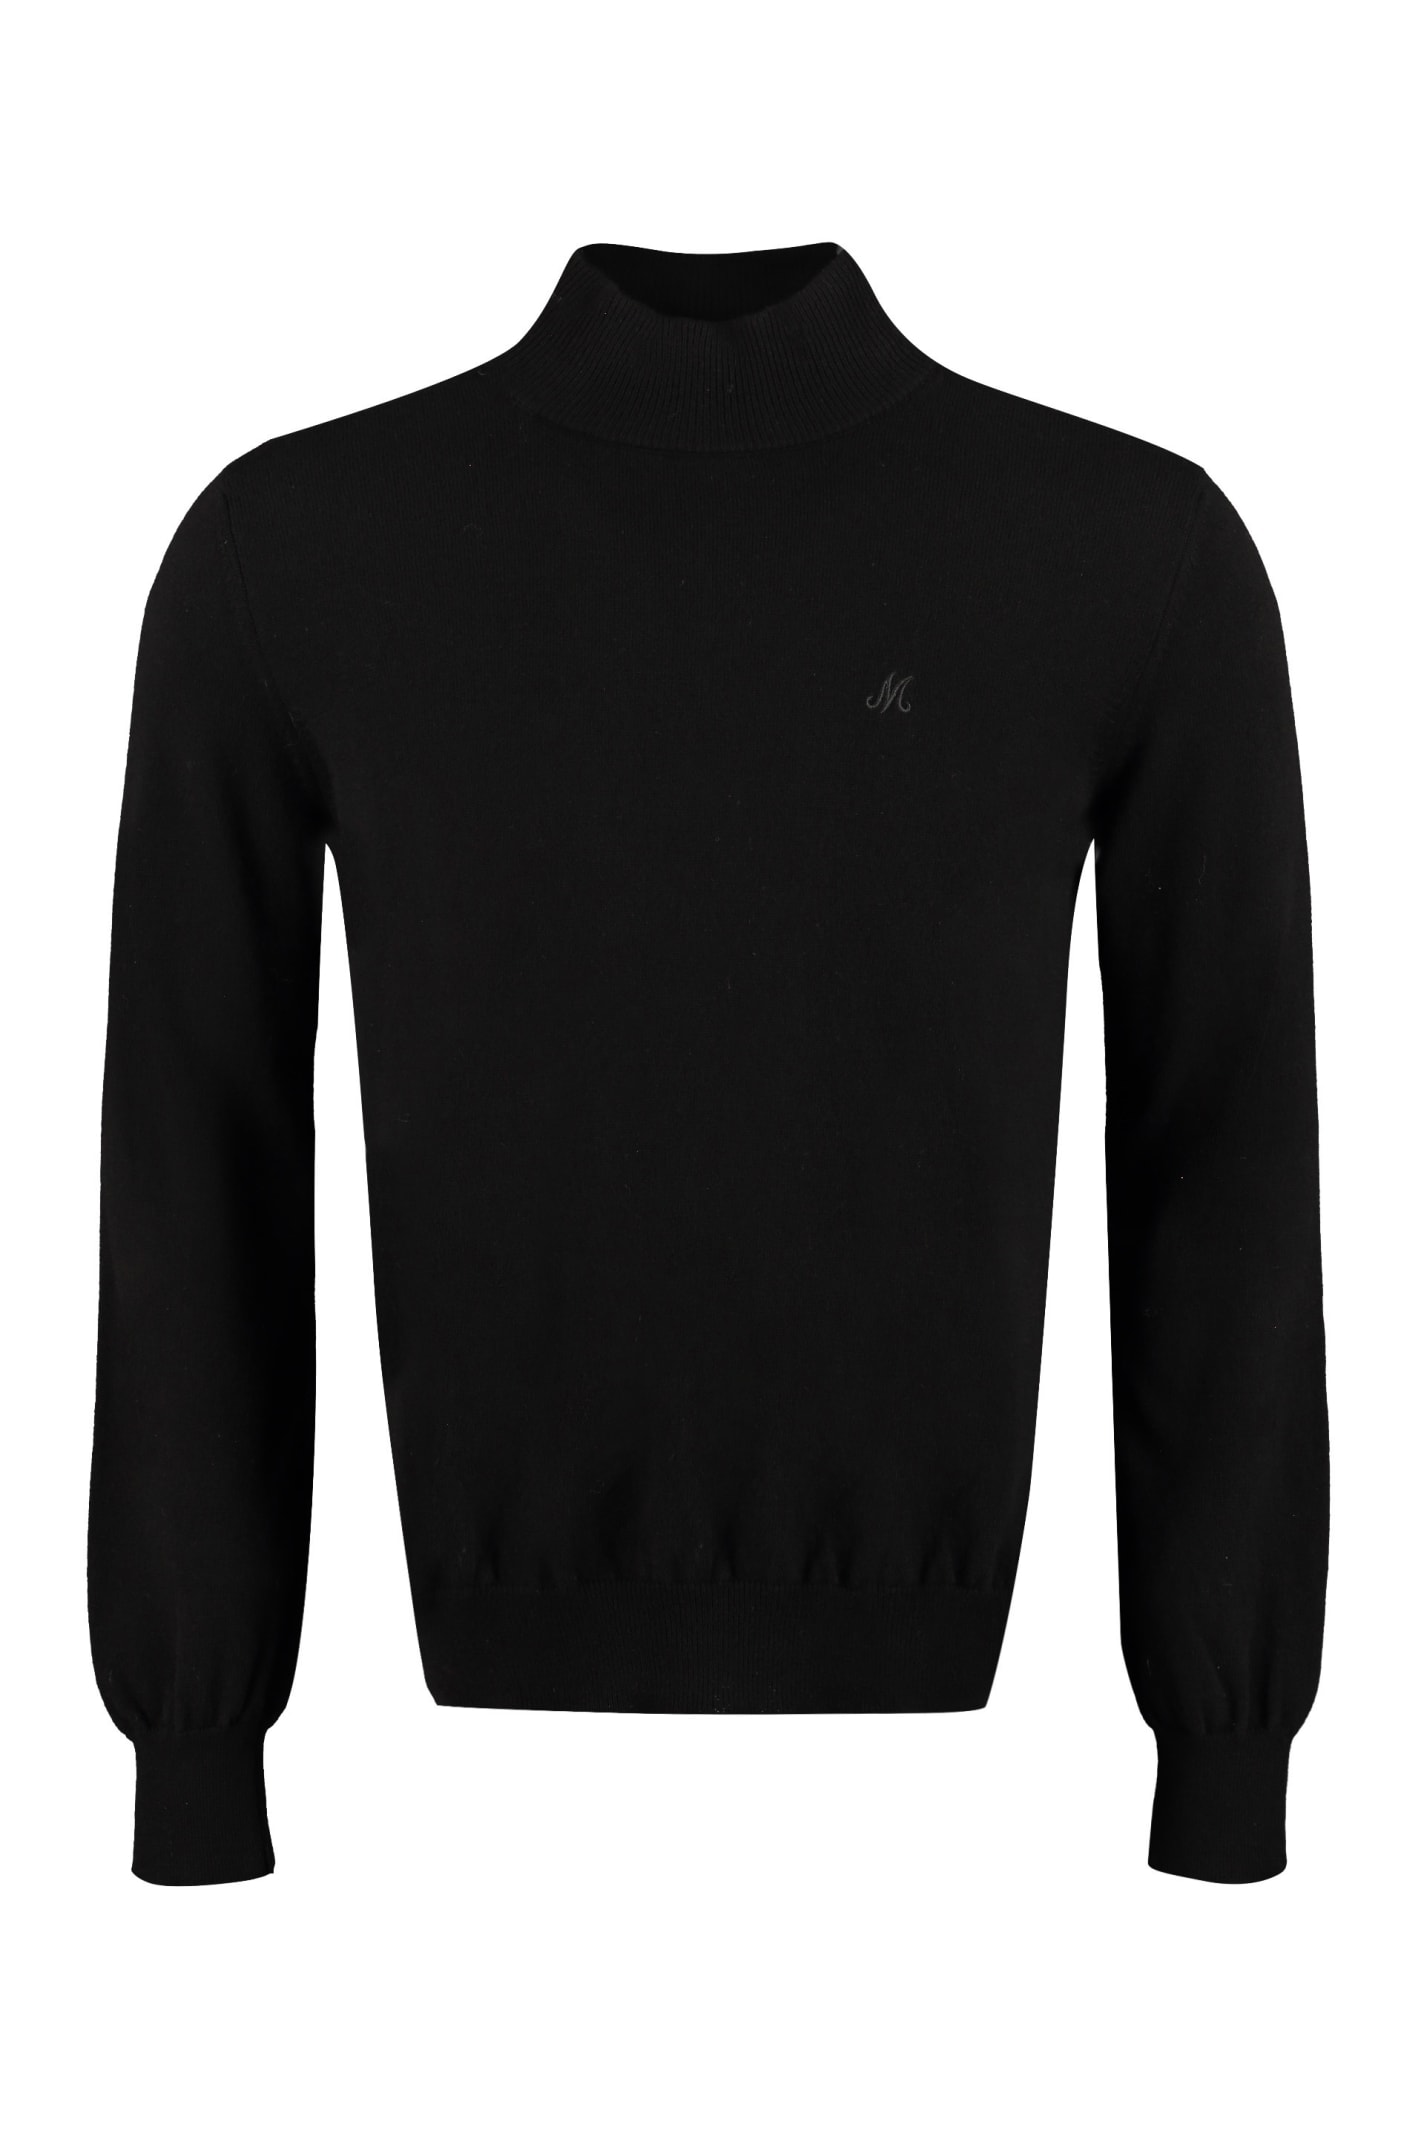 MSGM Wool And Cachemire Turtleneck Pullover